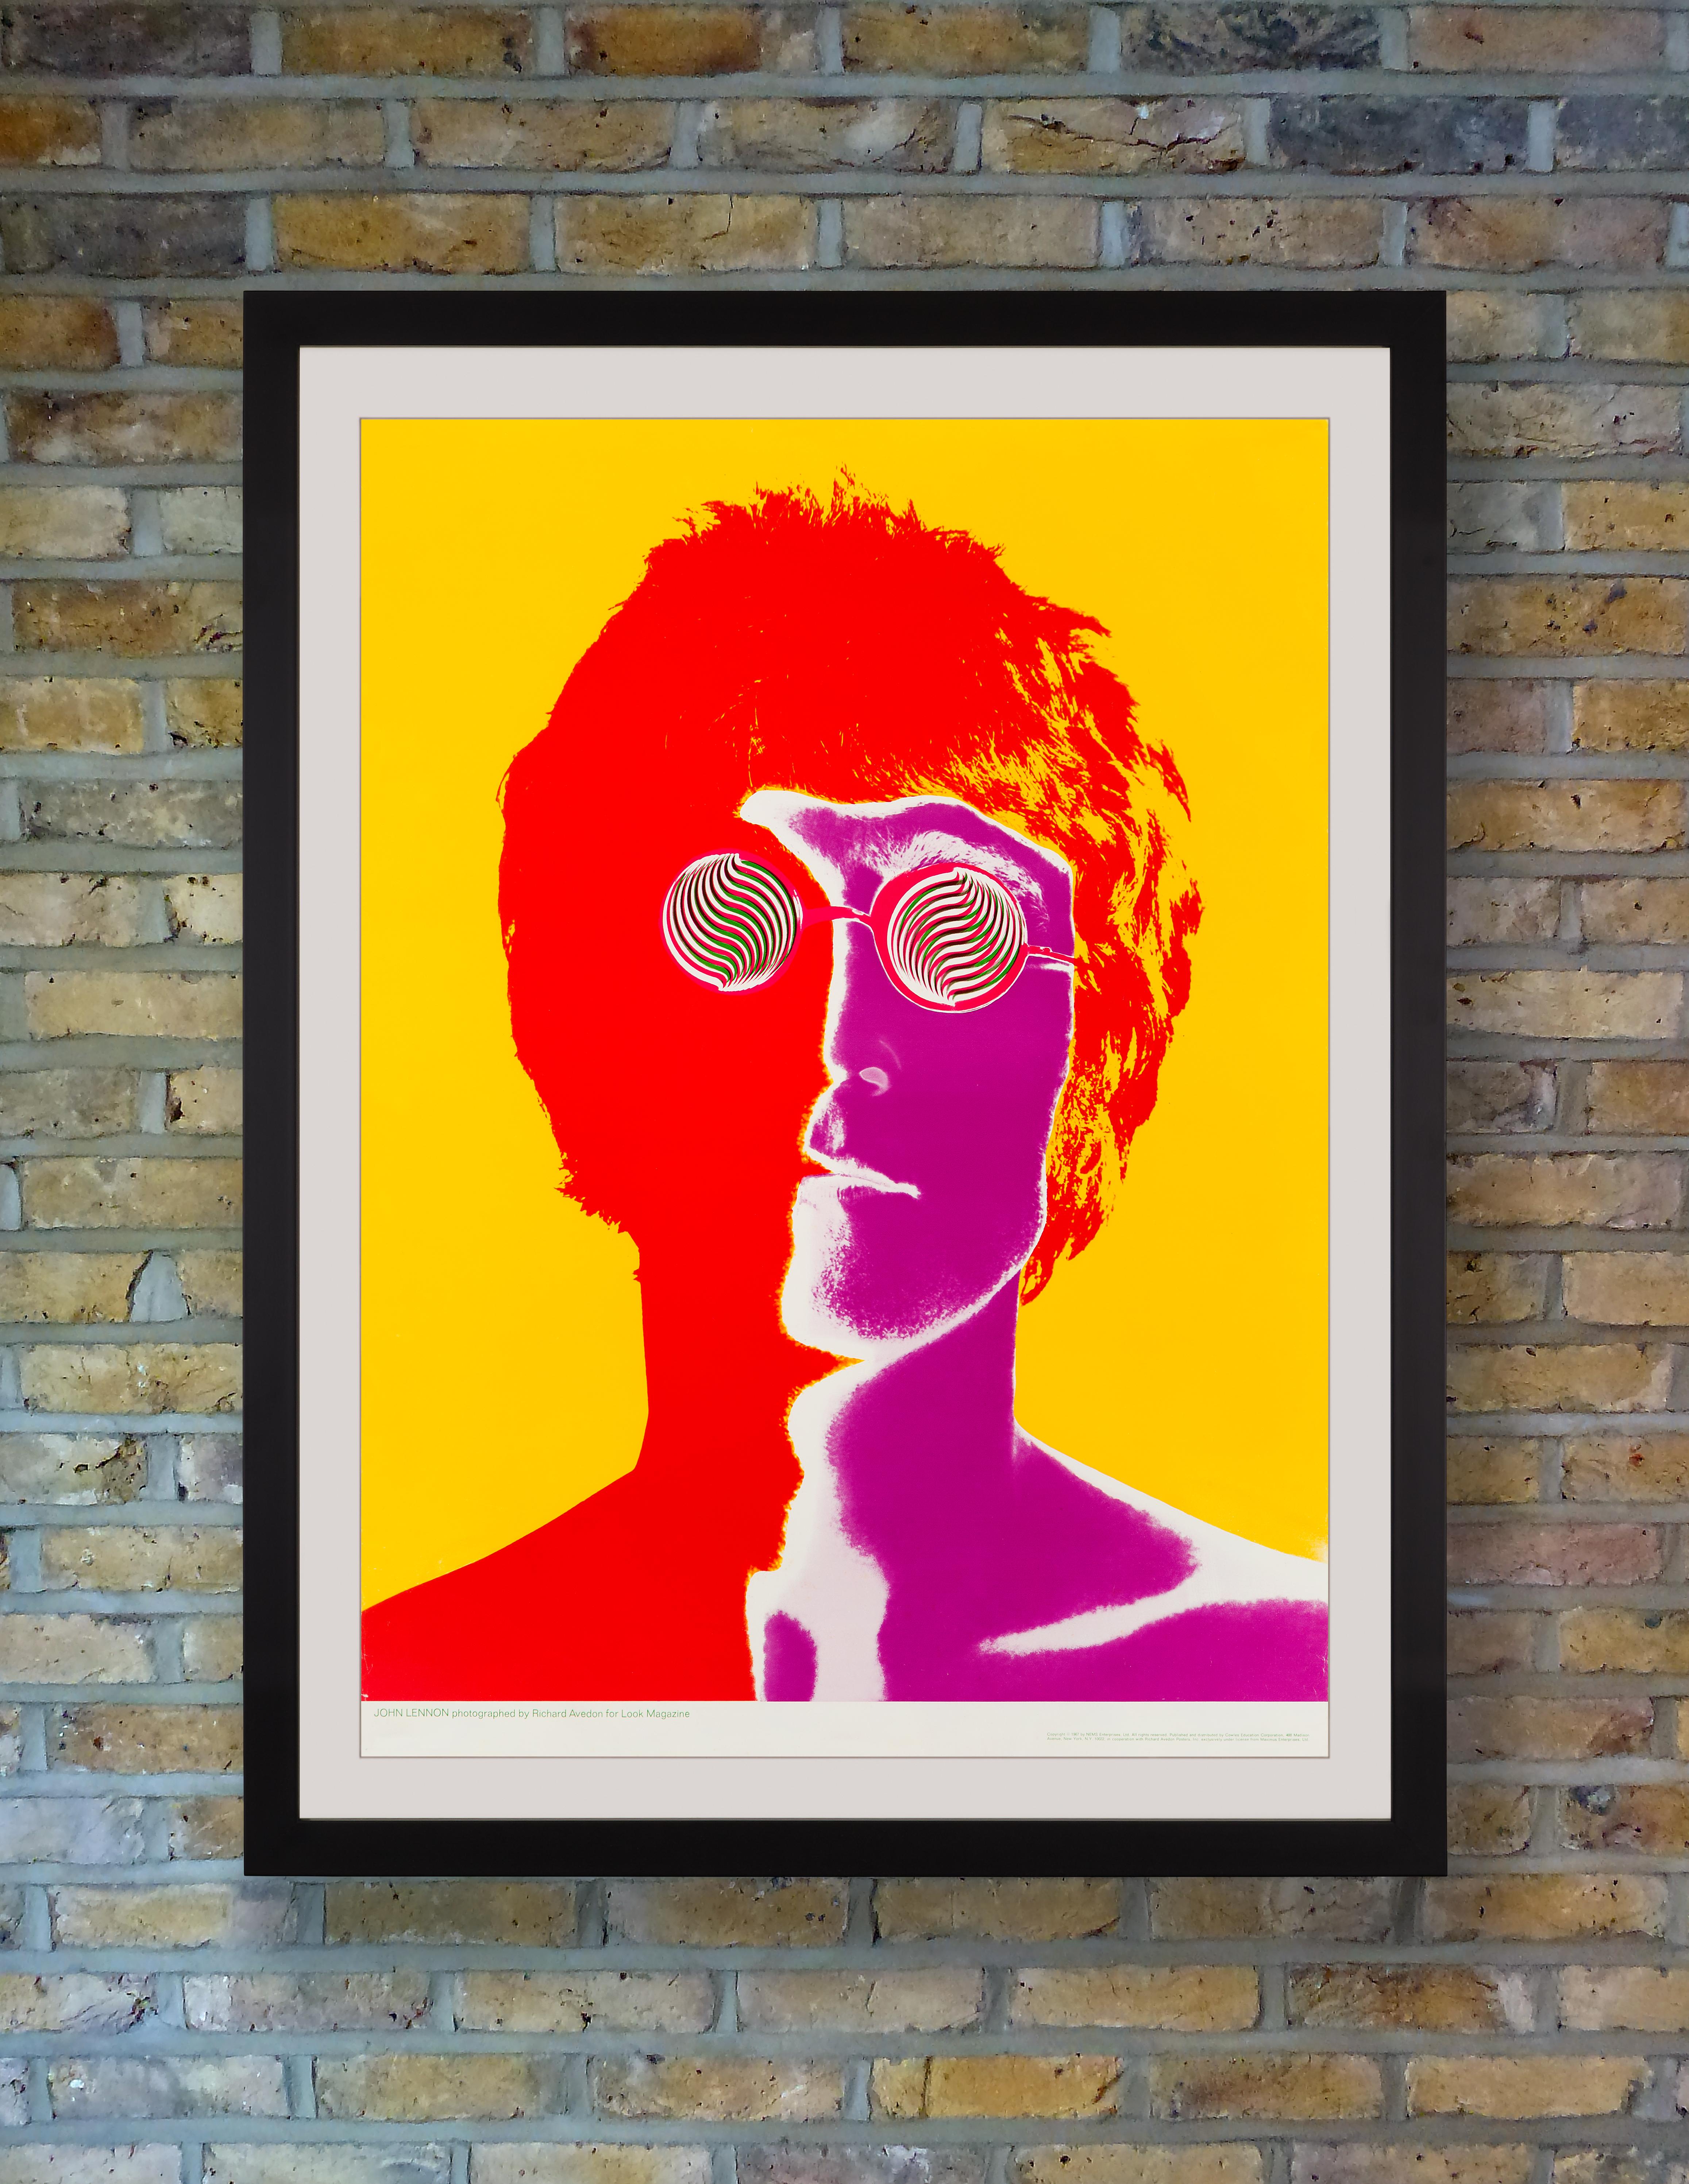 Beatles manager Brian Epstein commissioned Richard Avedon to photograph the band and design a set of posters that would visually capture the new psychedelic direction of Sgt. Pepper''s Lonely Hearts Club Band and Magical Mystery Tour. Following the